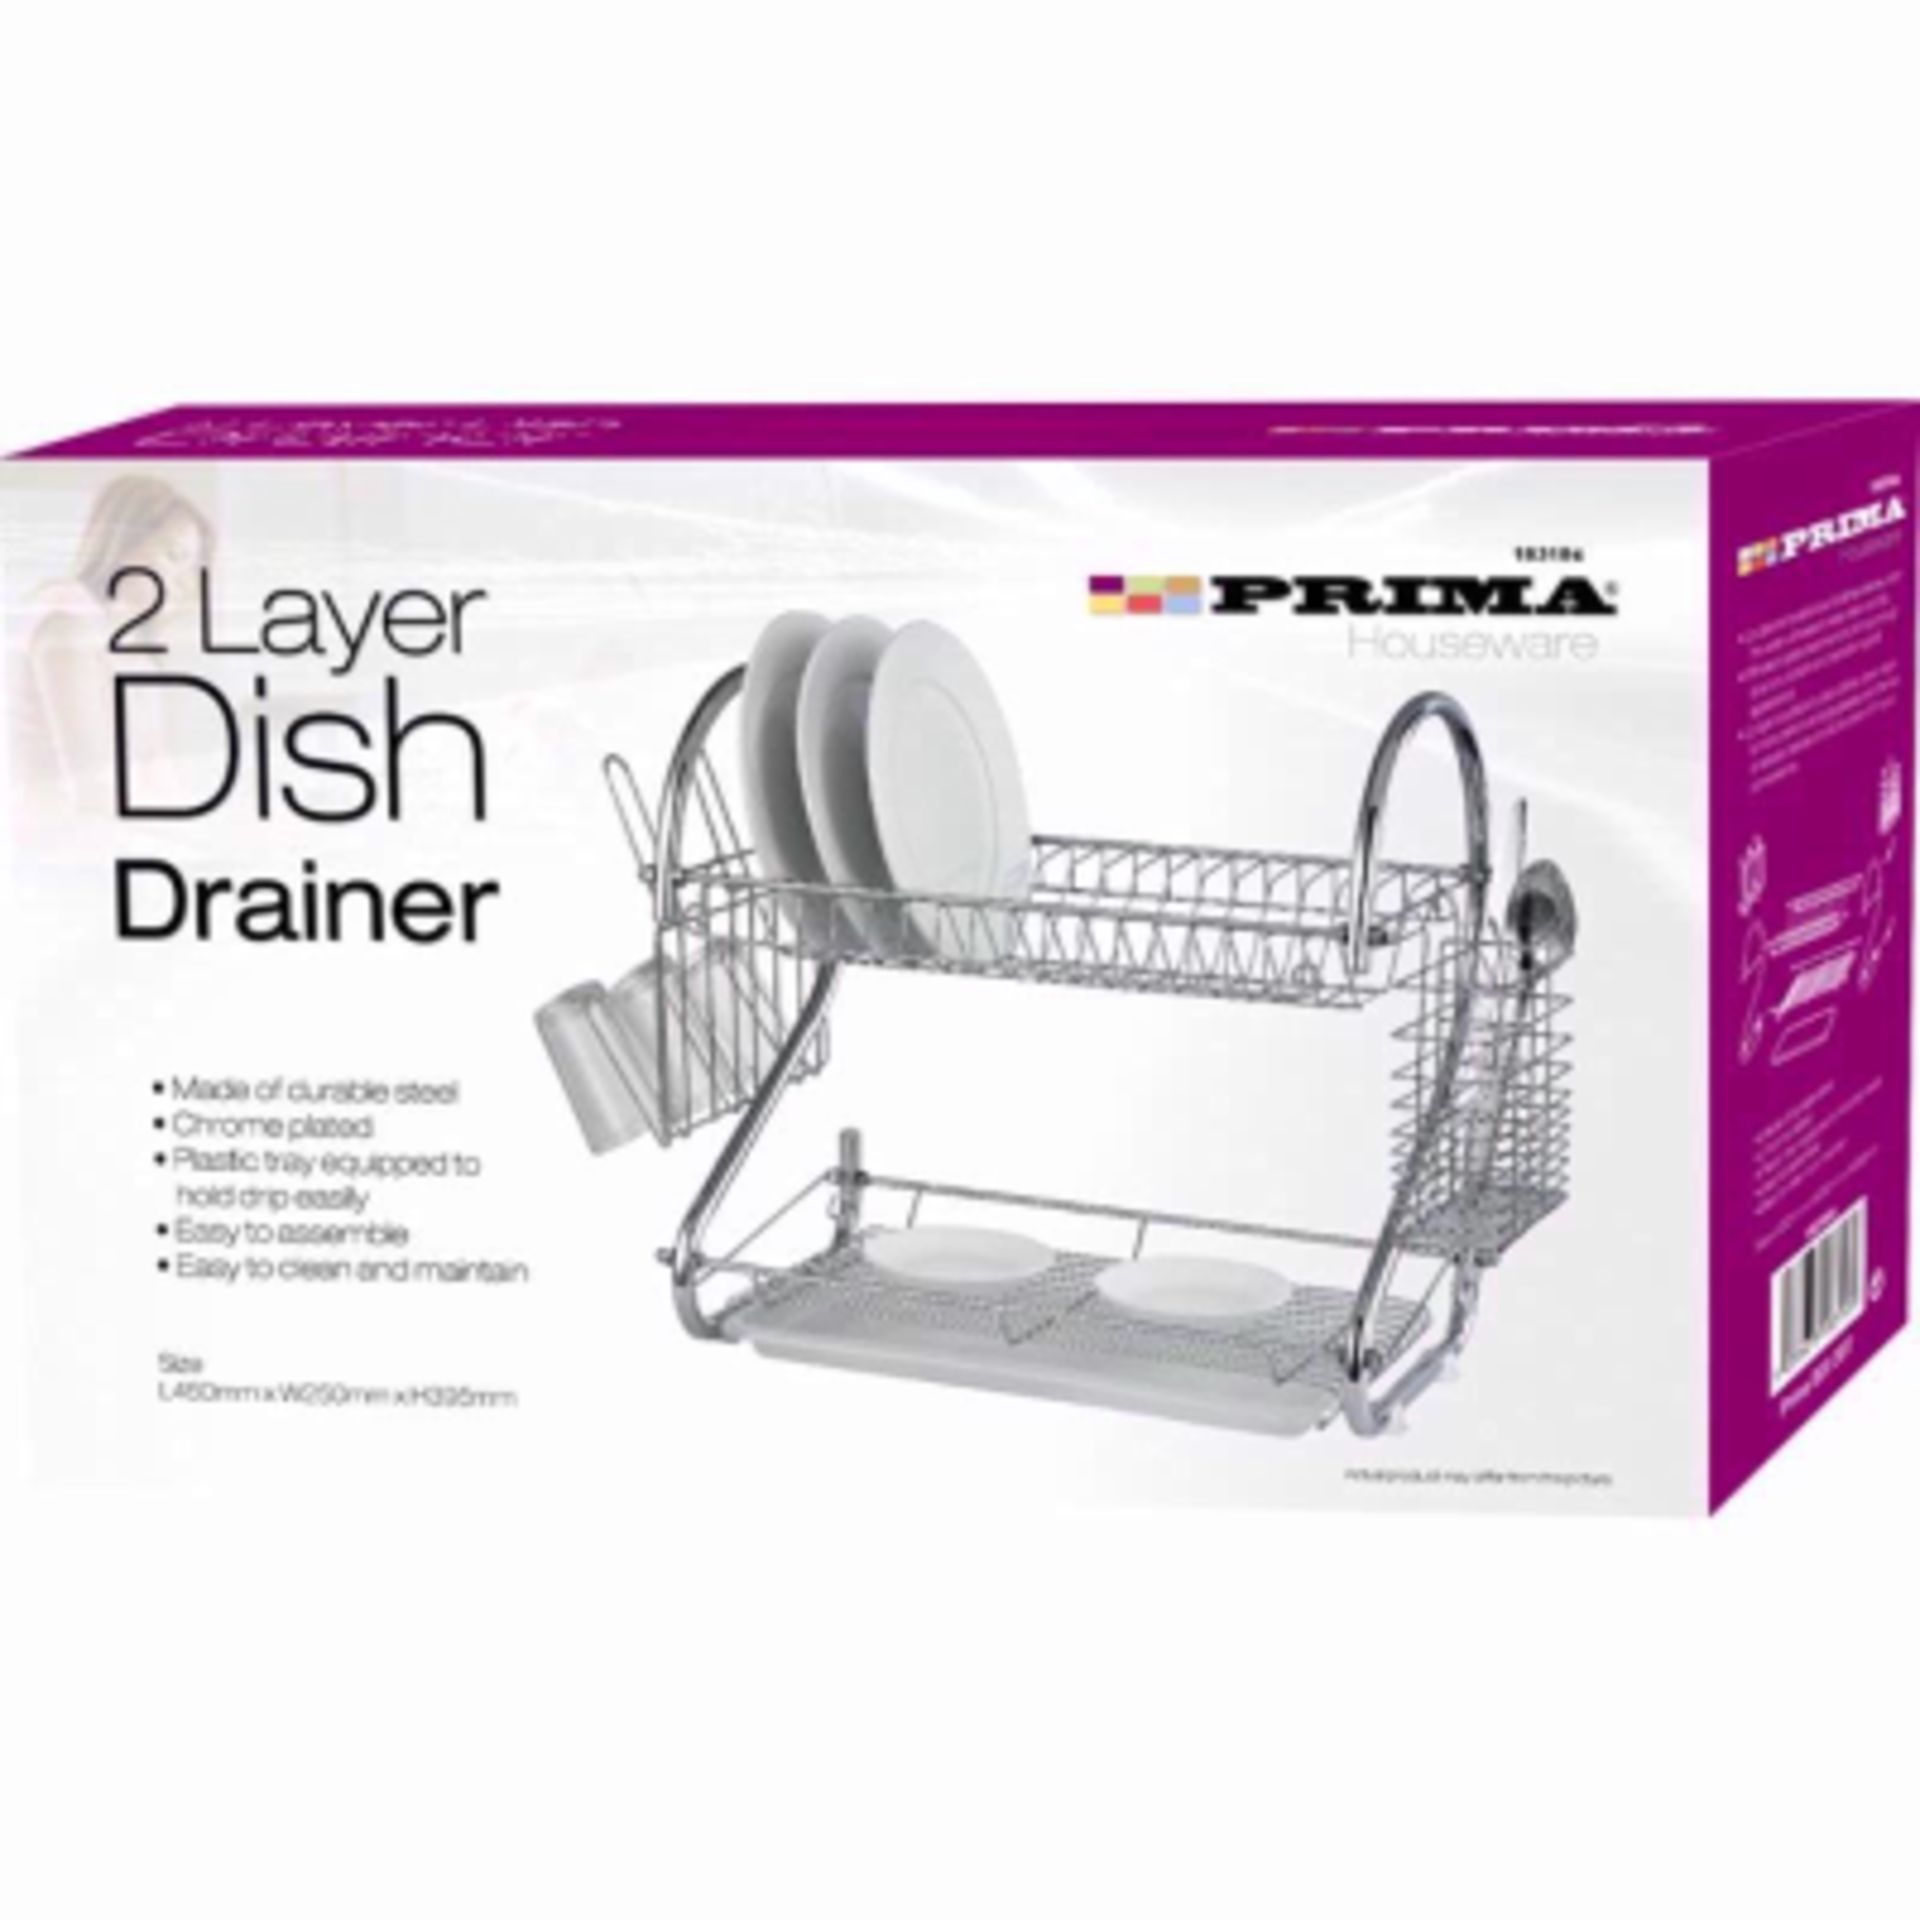 V *TRADE QTY* Brand New Two Layer Chrome Plated Dish Drainer - With Plastic Tray - Easy to